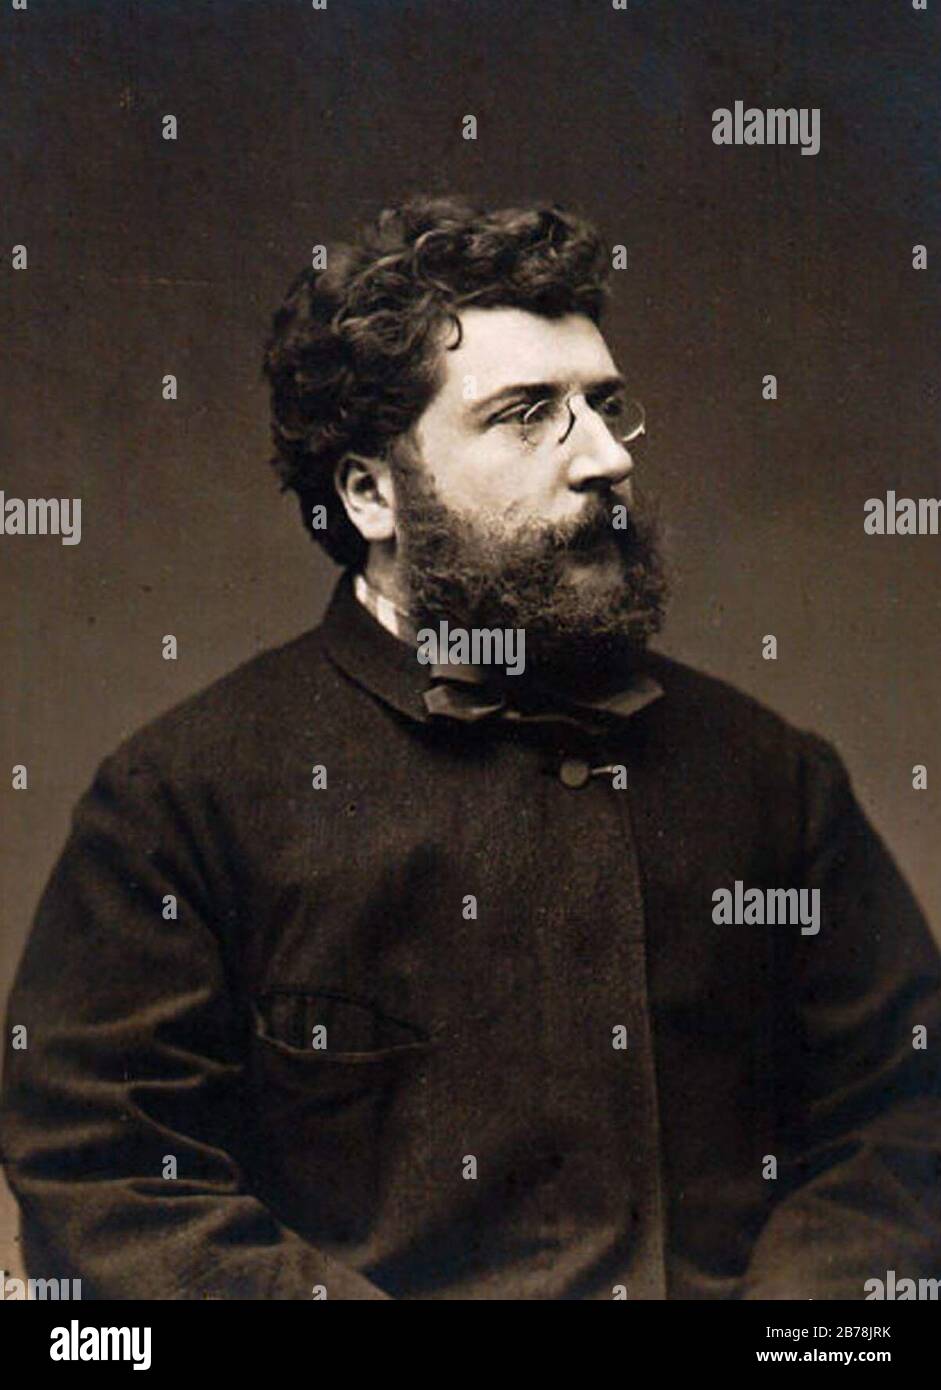 Georges Bizet (flipped). Stock Photo